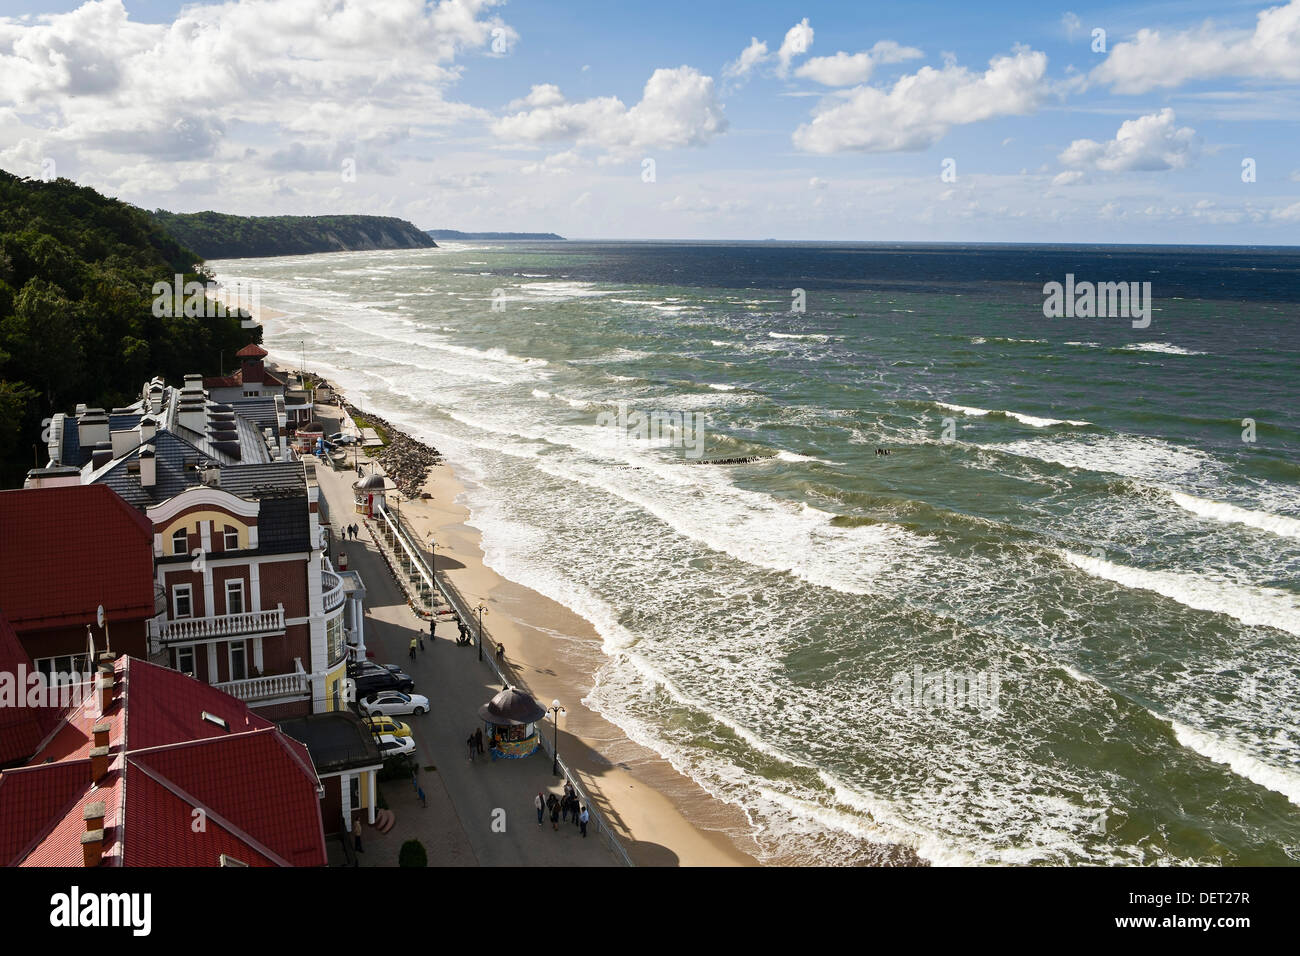 Sea front of Swetlogorsk, Russia Stock Photo